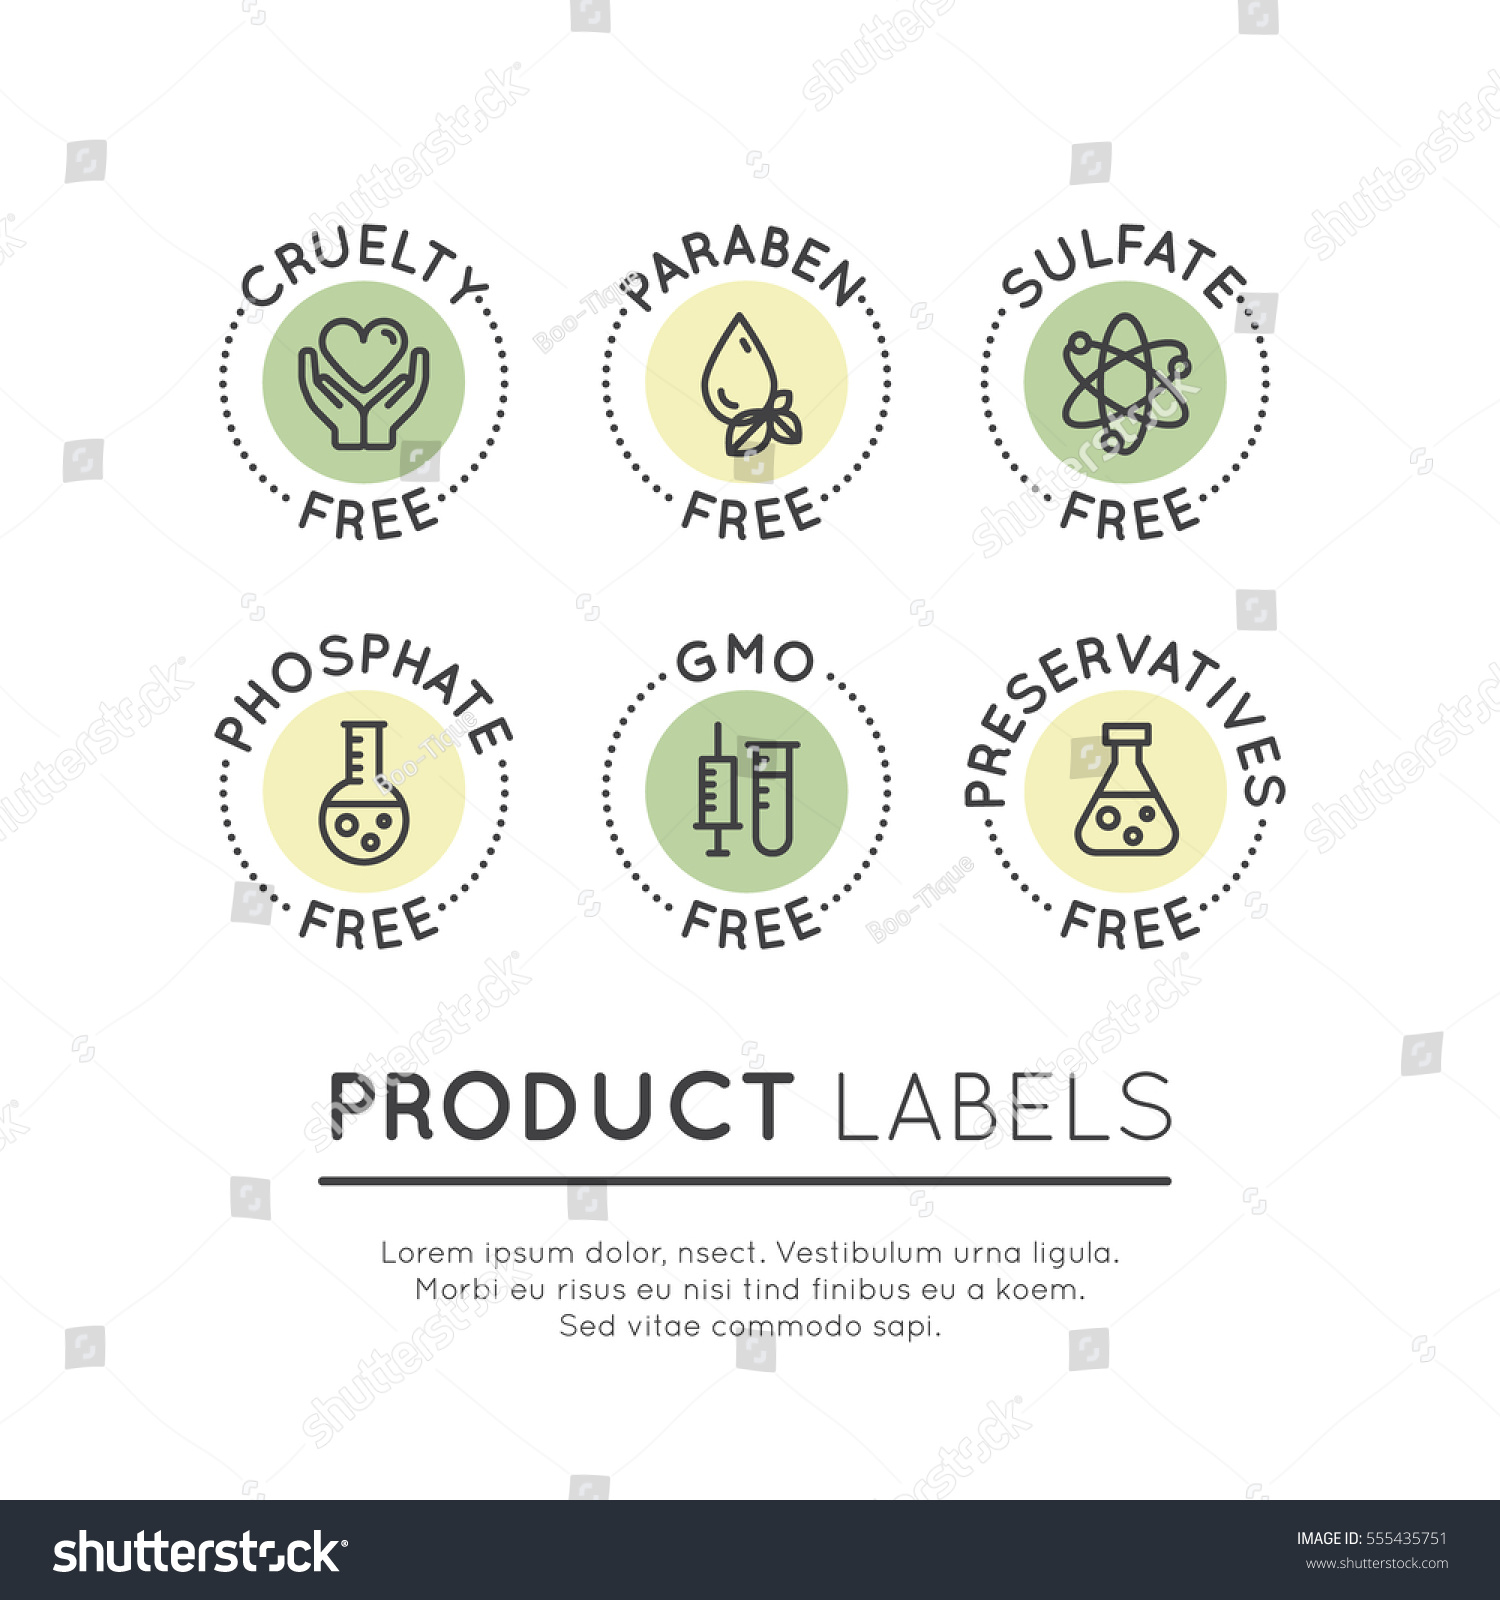 SVG of Isolated Vector Style Illustration Logo Set Badge Ingredient Warning Label Icons. GMO, SLS, Paraben, Cruelty, Sulfate, Sodium, Phosphate, Silicone, Preservative Free Organic Product Stickers svg